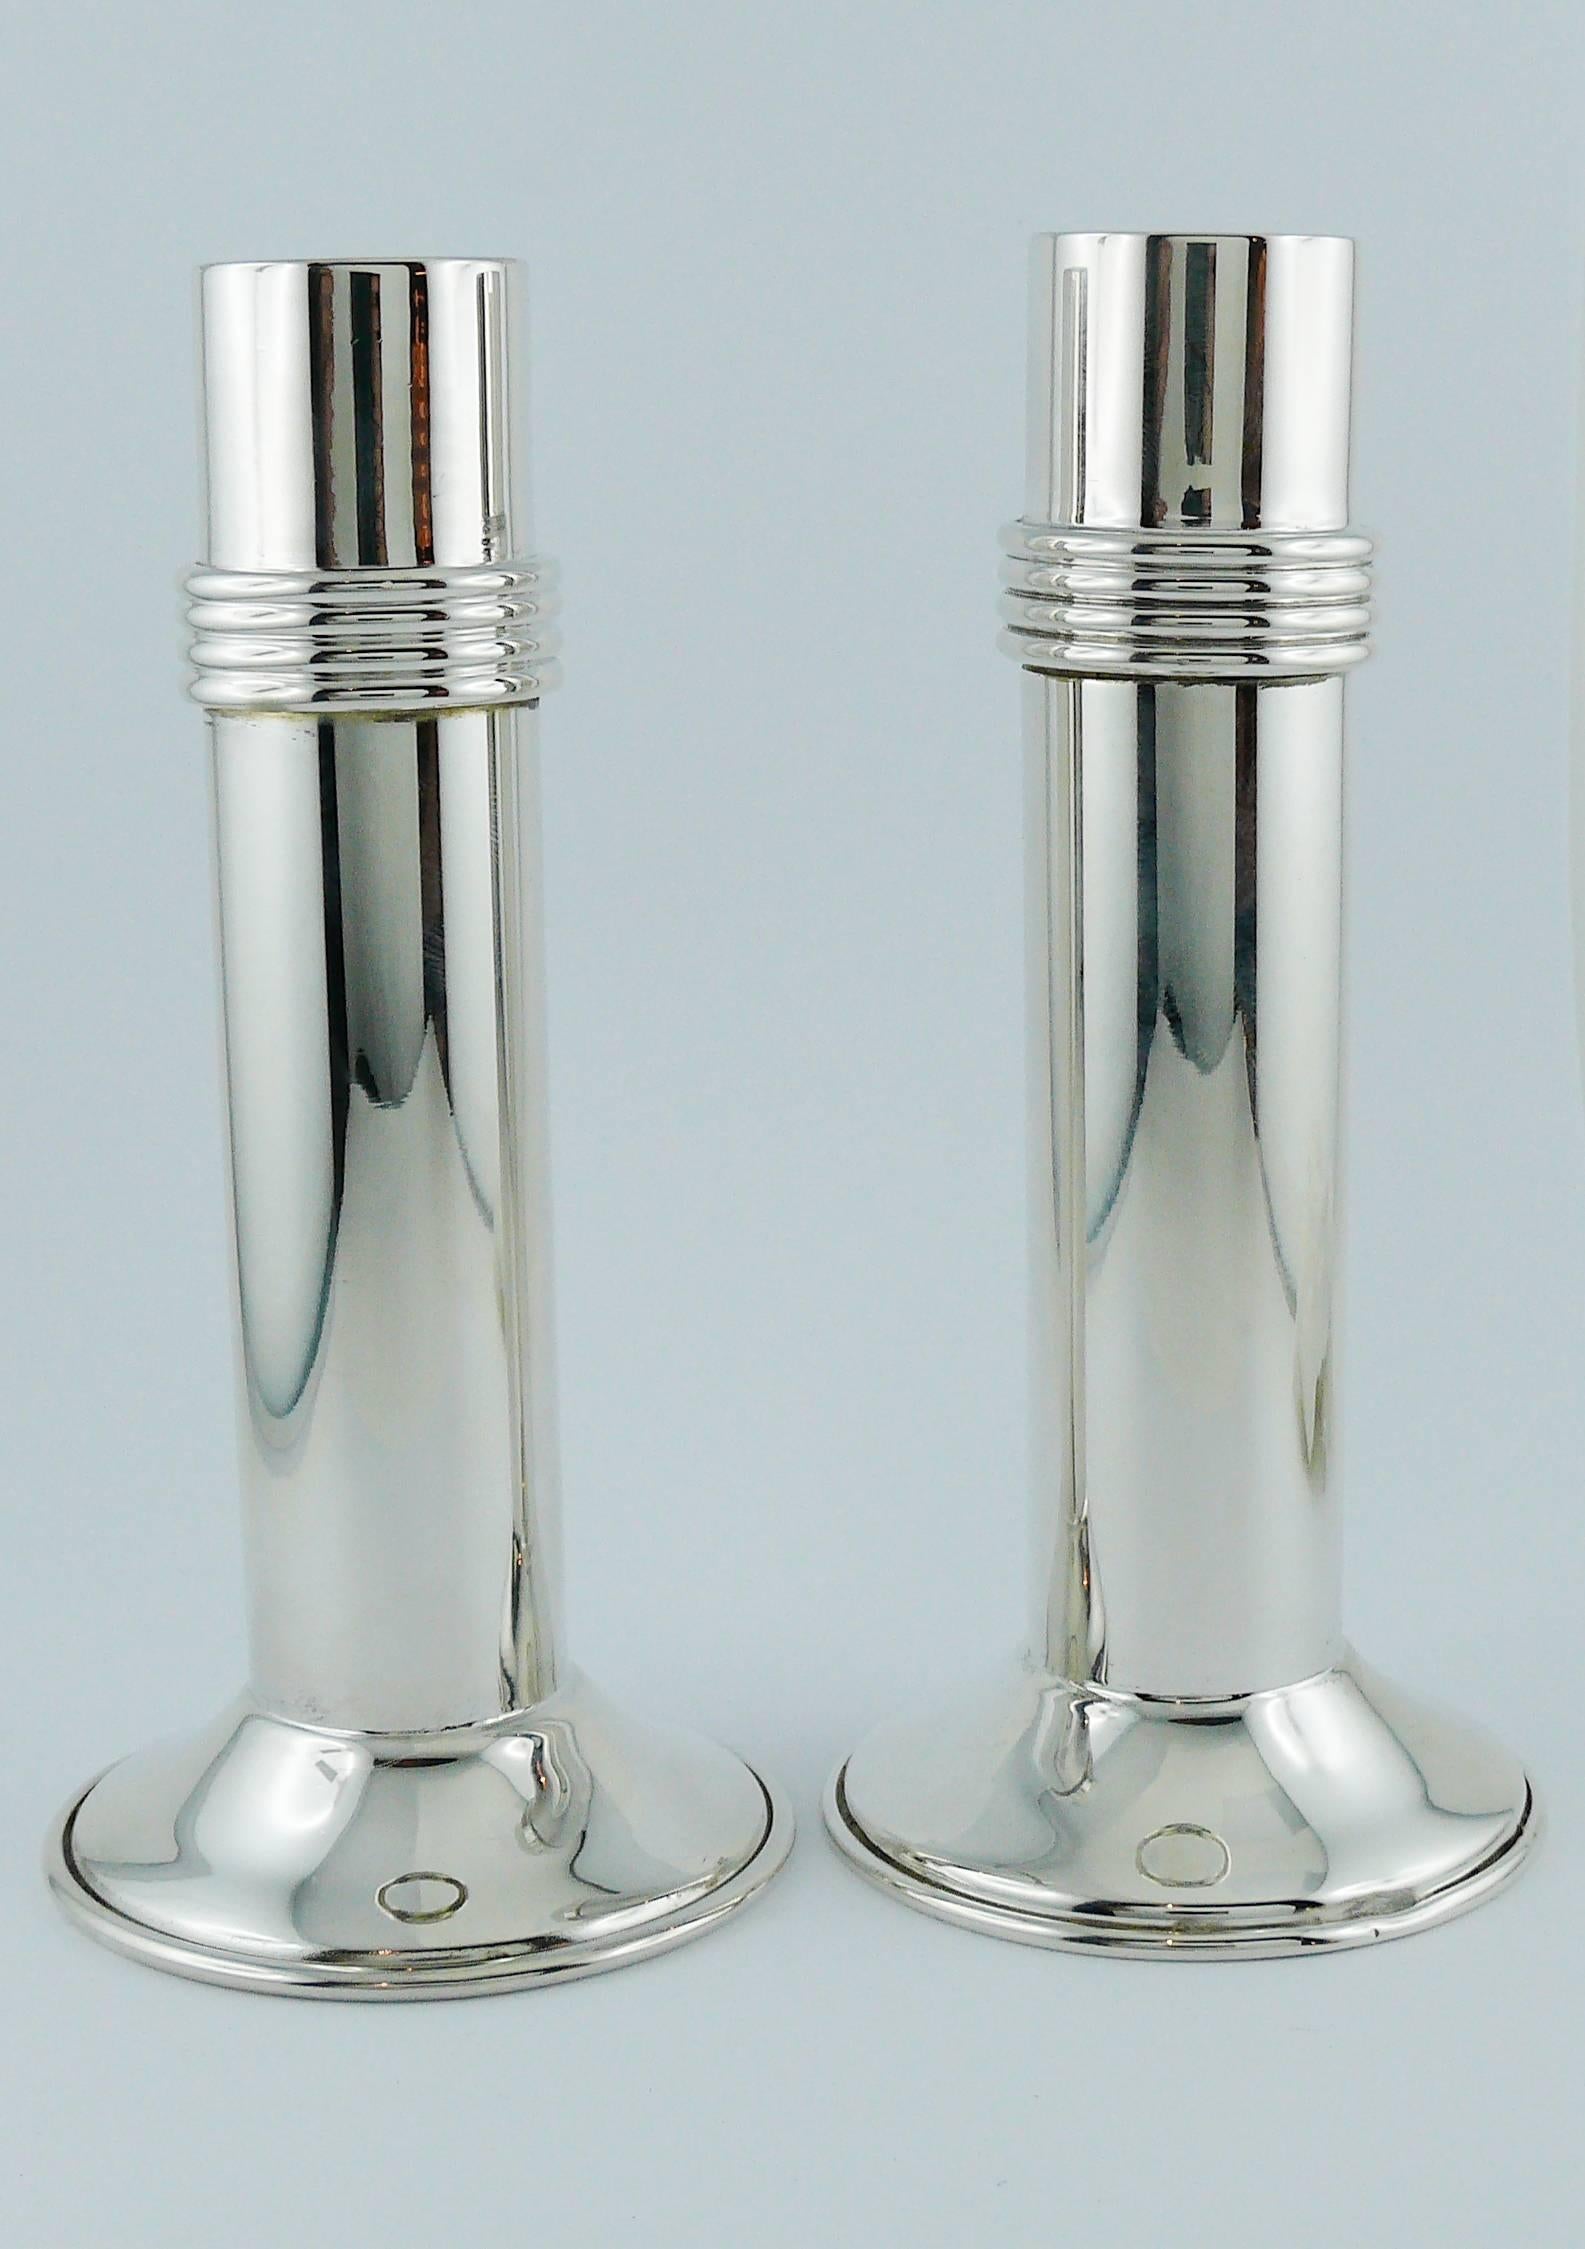 CHRISTIAN DIOR vintage pair of Art Deco inspired candleholders.

These silver plate sophisticated candleholders feature the iconic streamline design with concentric rings and clean lines.

Embossed CHRISTIAN DIOR.
Hallmarked.

Indicative